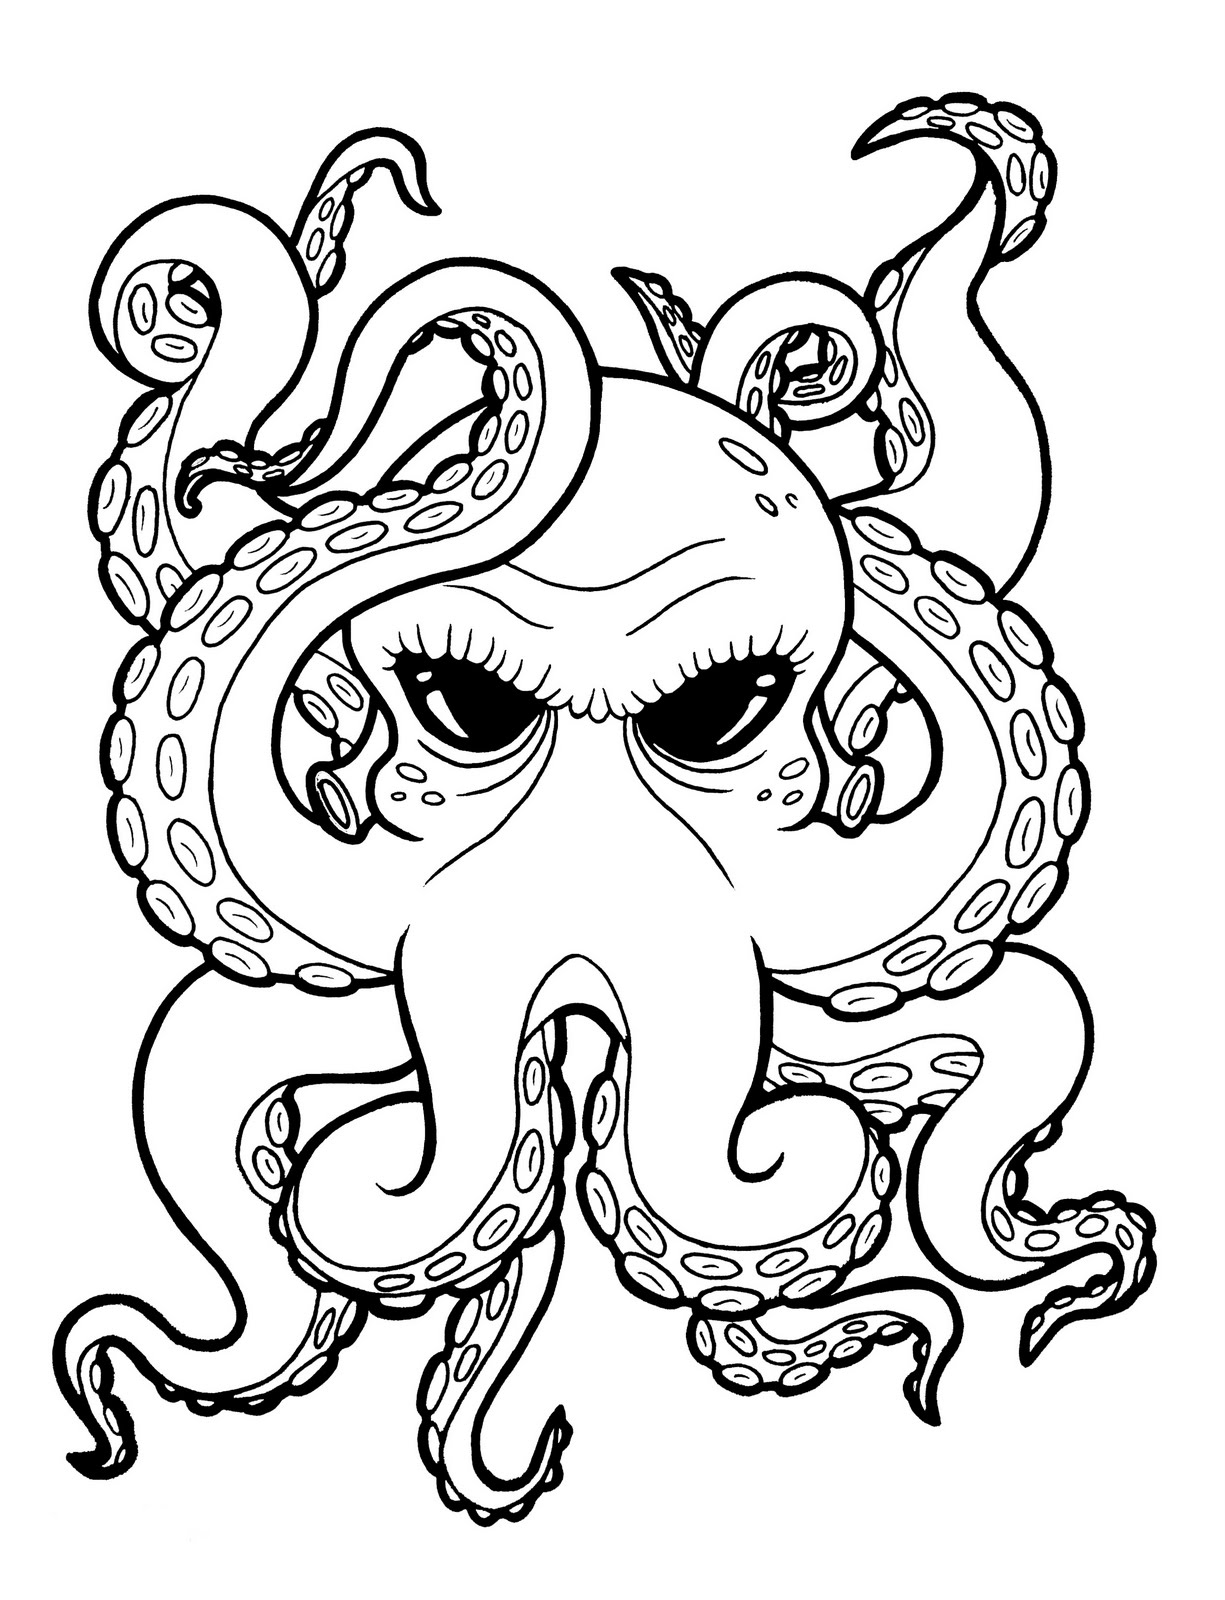 Images For > Cartoon Octopus Drawing